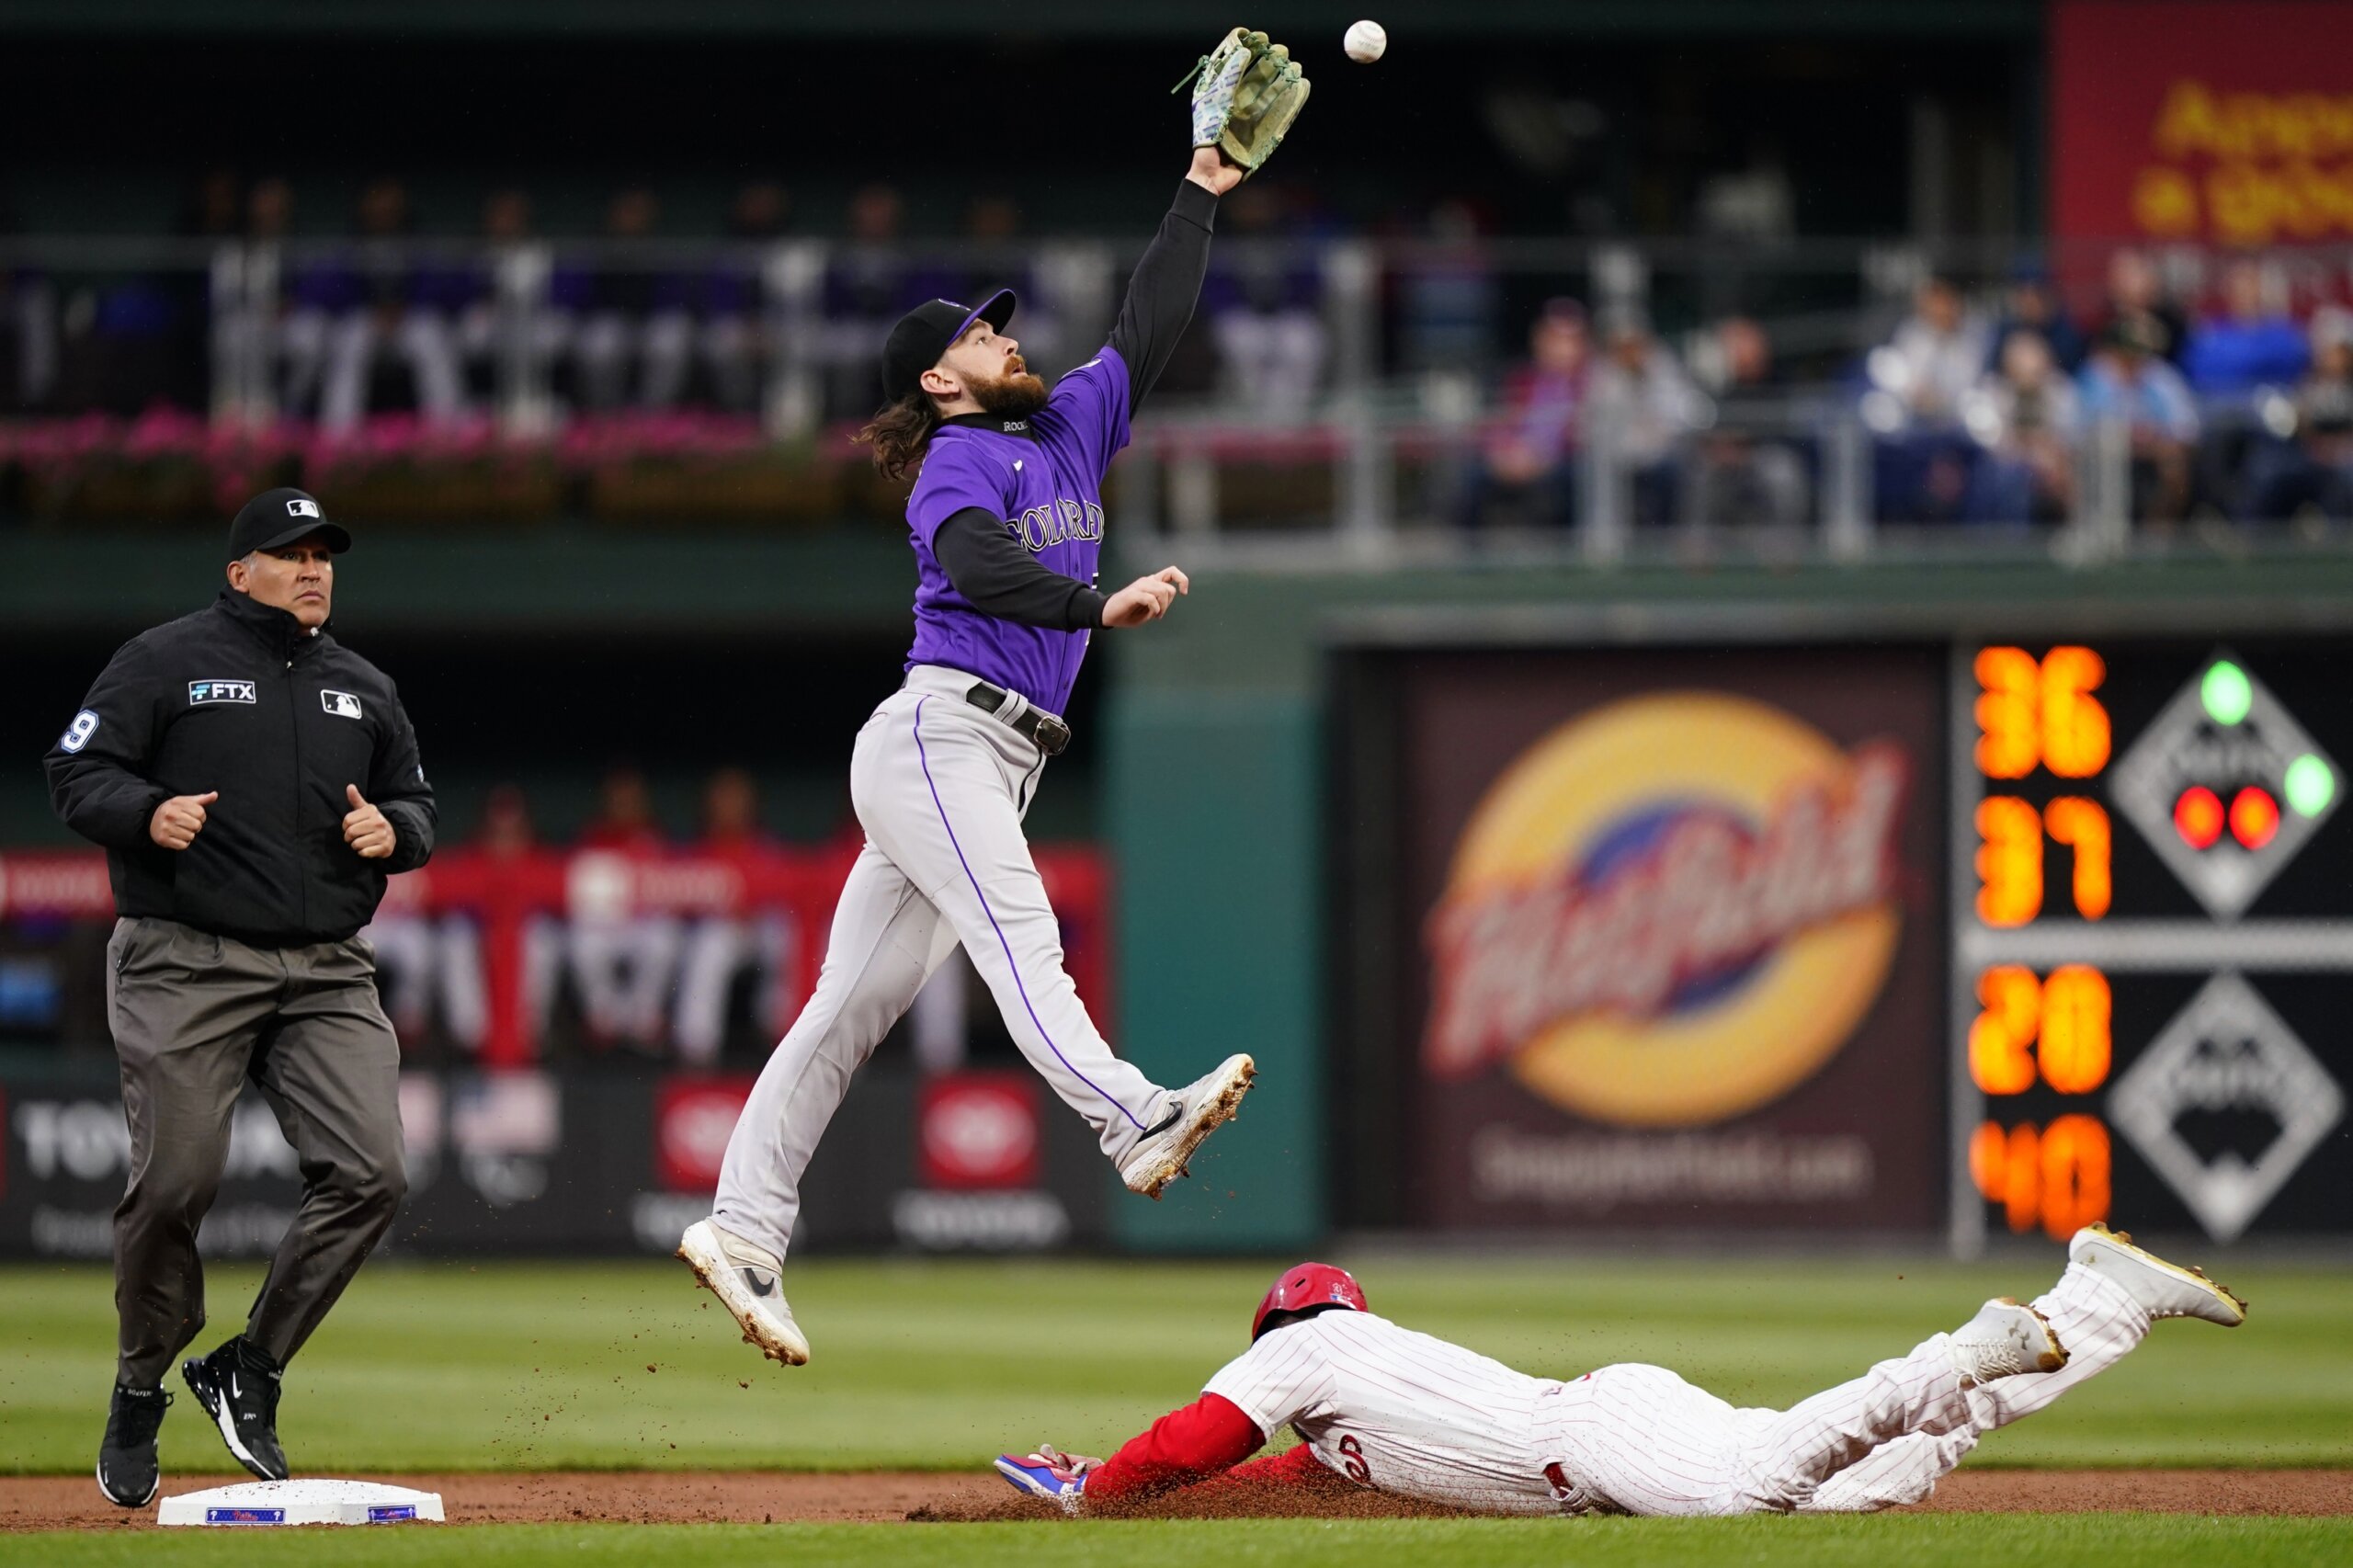 Rockies play the Astros with 1-0 series lead - WTOP News